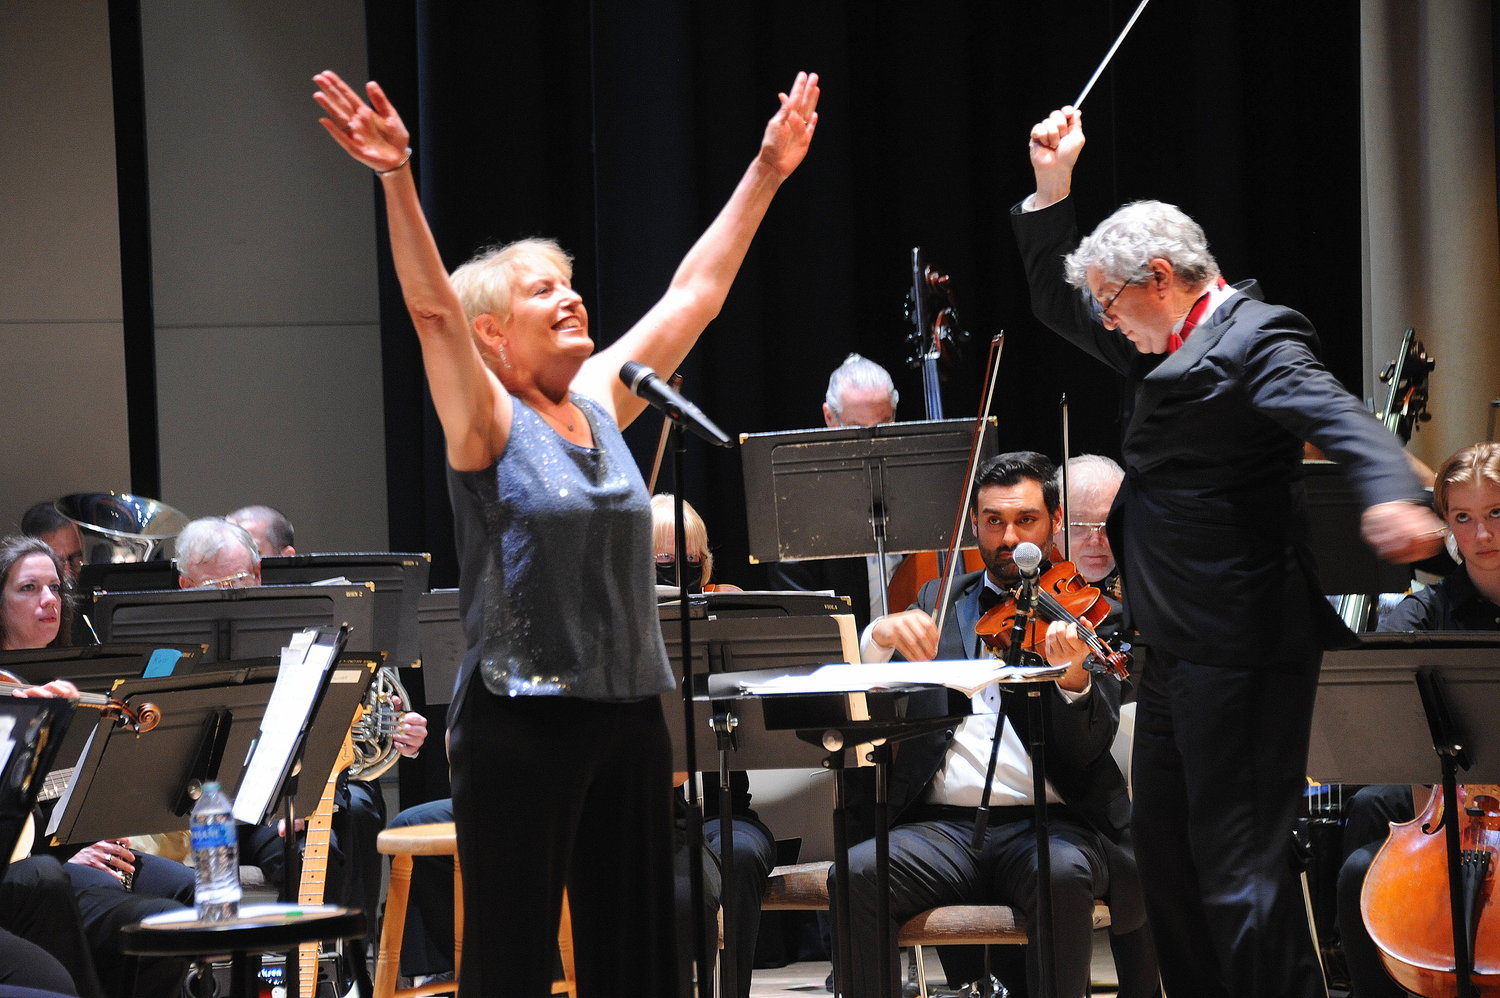 Liz Callaway finishes her song as Conductor Gary Fagin signals the end to her rendition of Stephen Sondheim’s “Send in the Clowns” at Fagin’s final Pops Concert with the Bucks County Symphony Orchestra last weekend at Delaware Valley University.